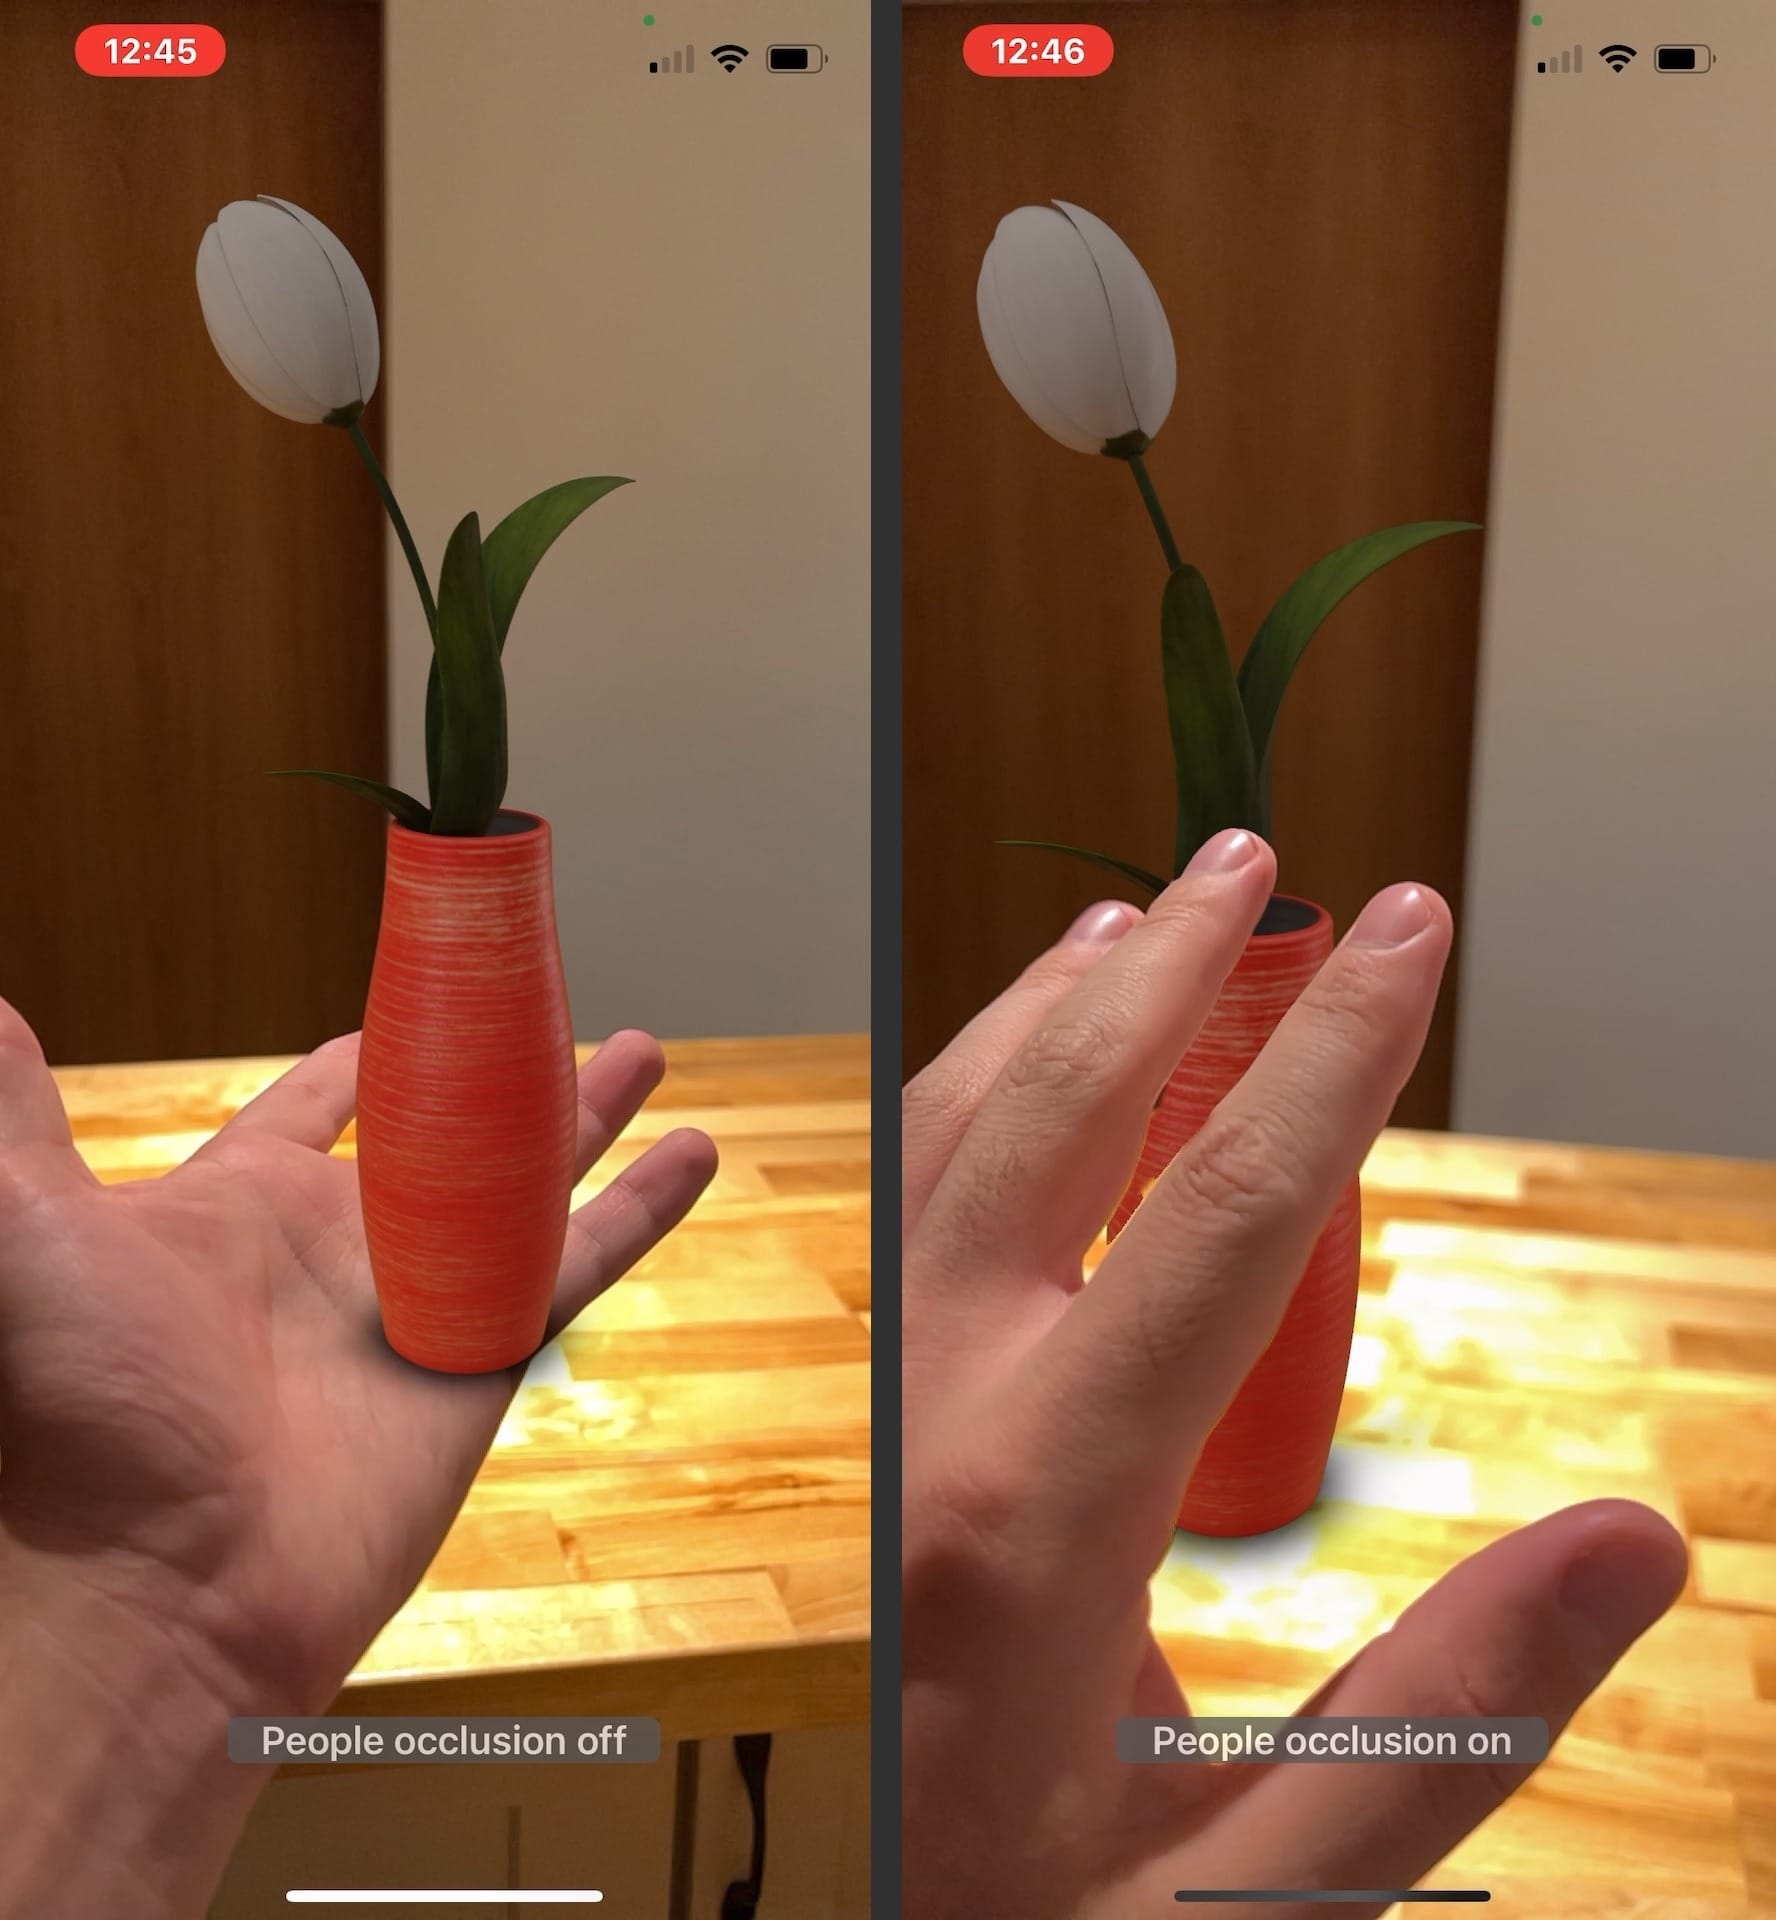 A side-by-side comparison shows the difference in apperance when people occlusion is turned on or off. Without it, the plant and hand do not realistically display